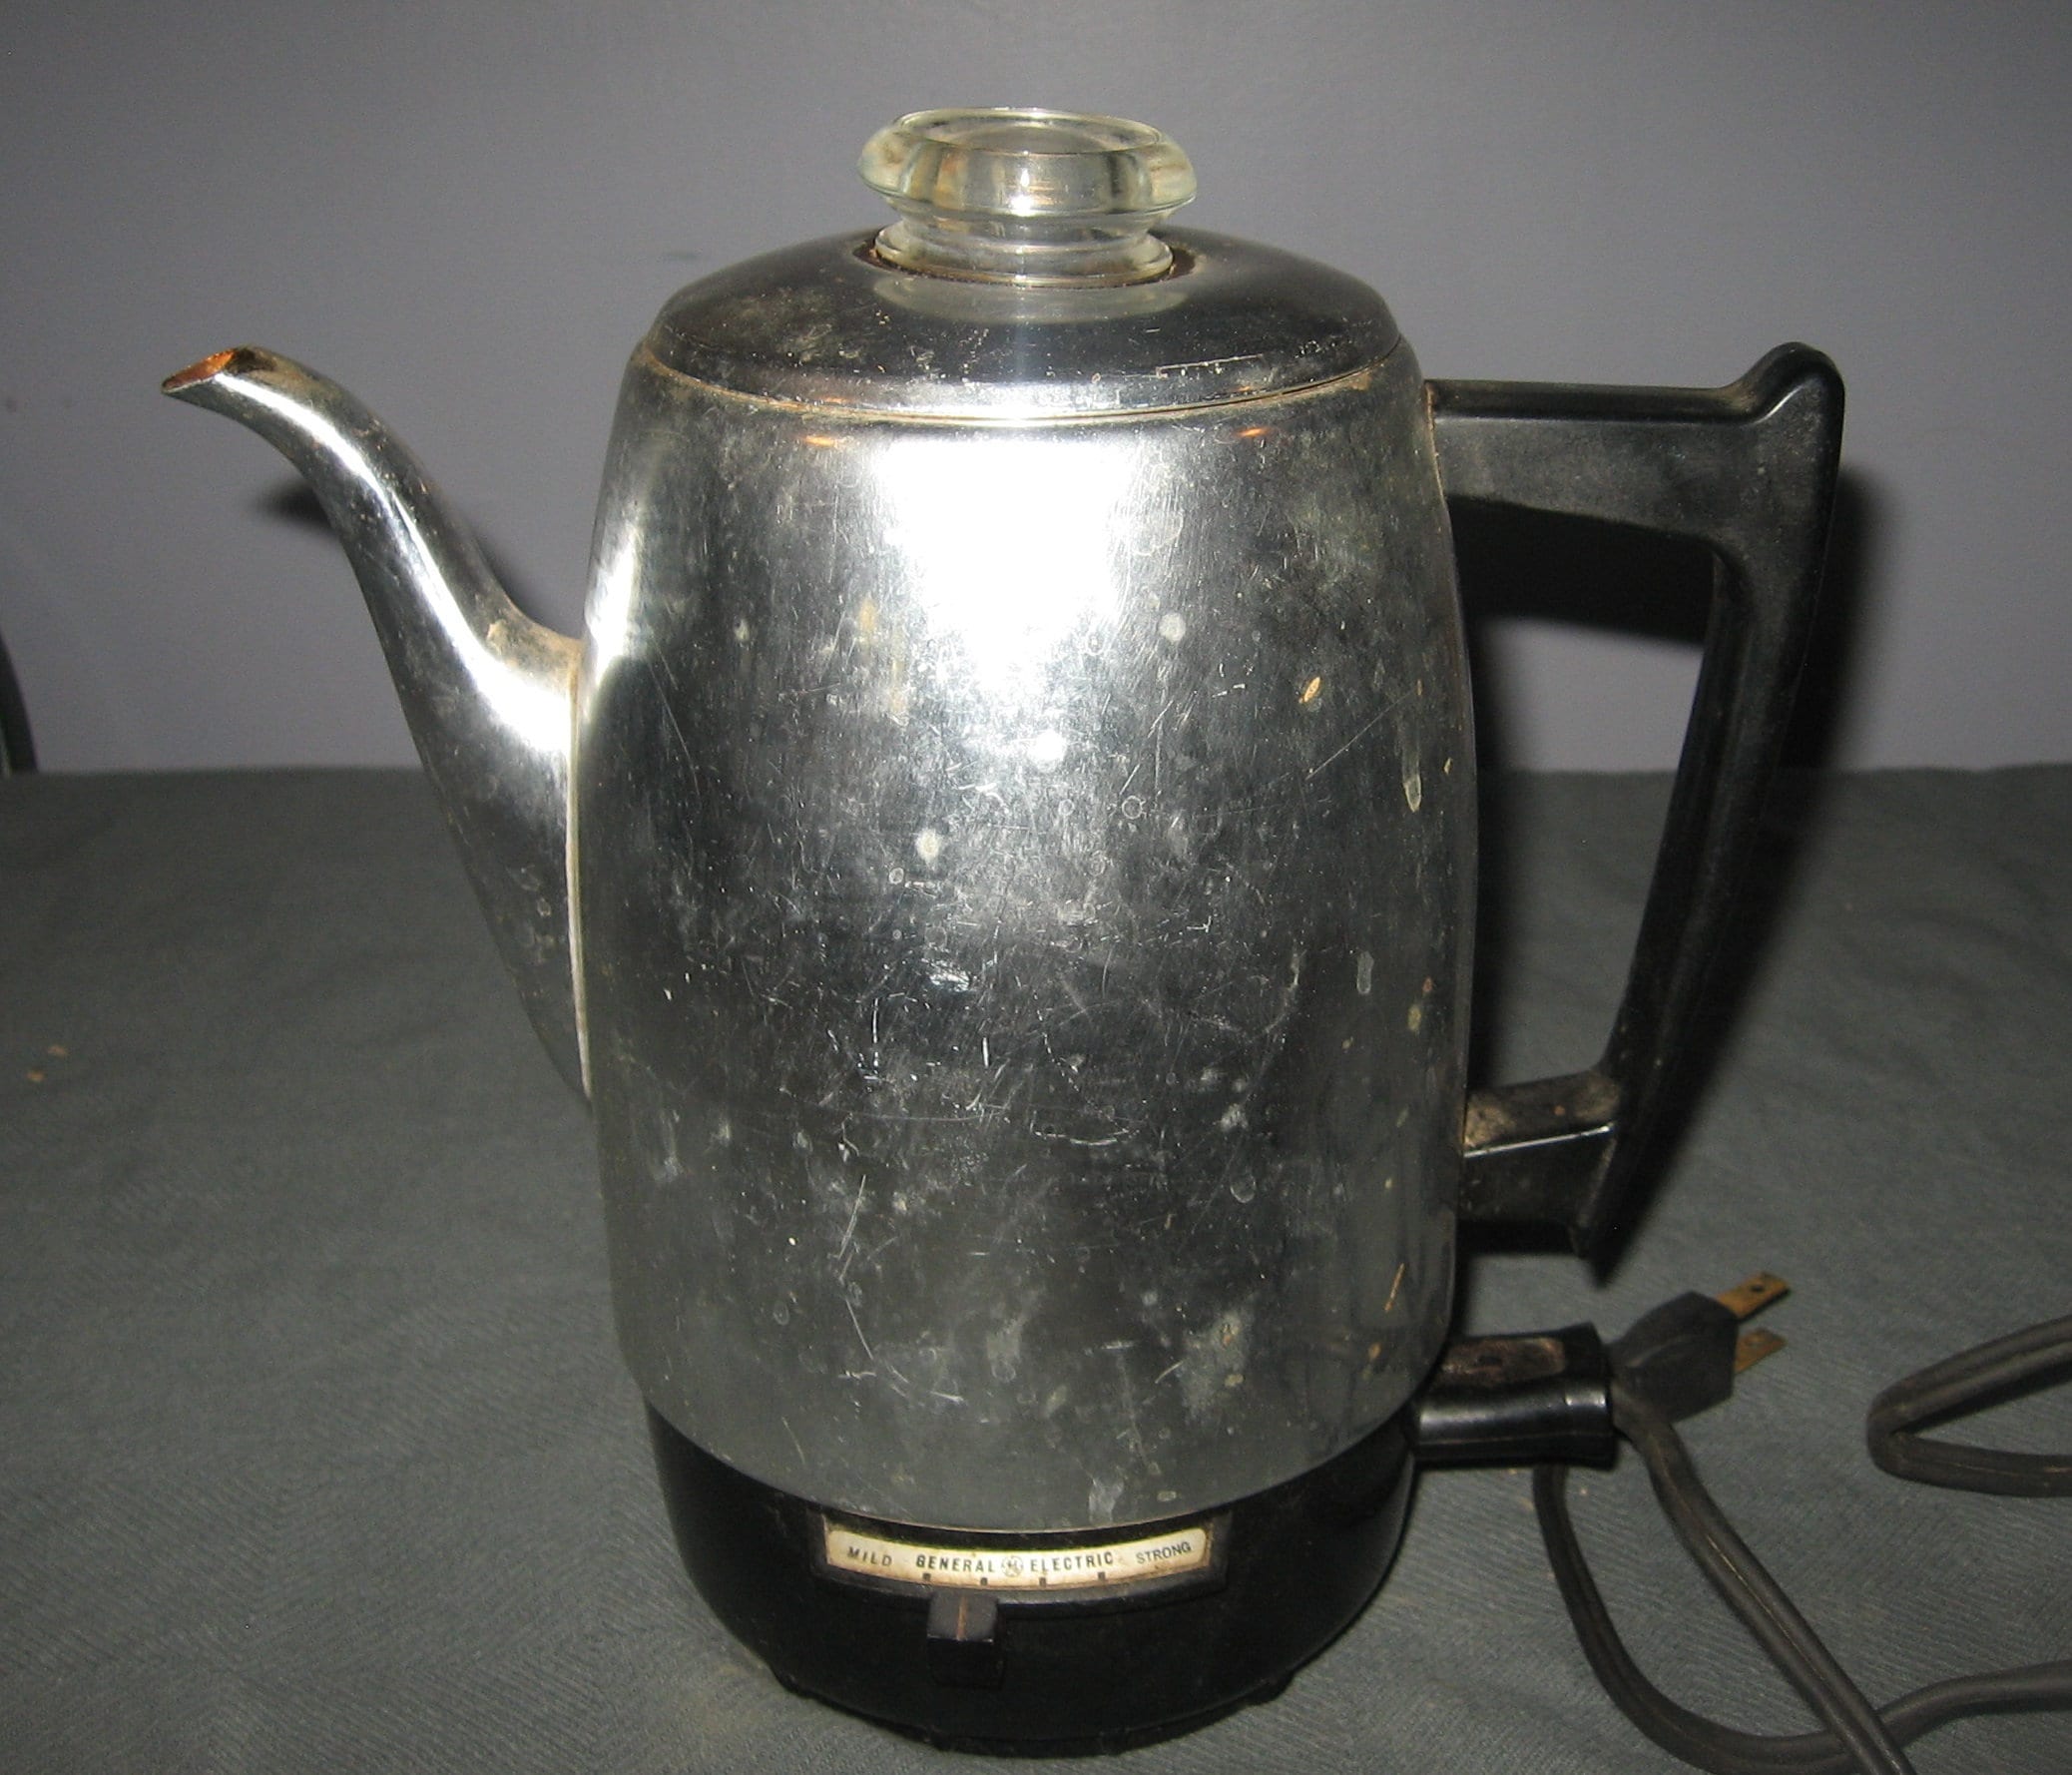 Vtg General Electric Automatic 4-8 cup Percolator Coffee Pot 473-A  Tested/Works!